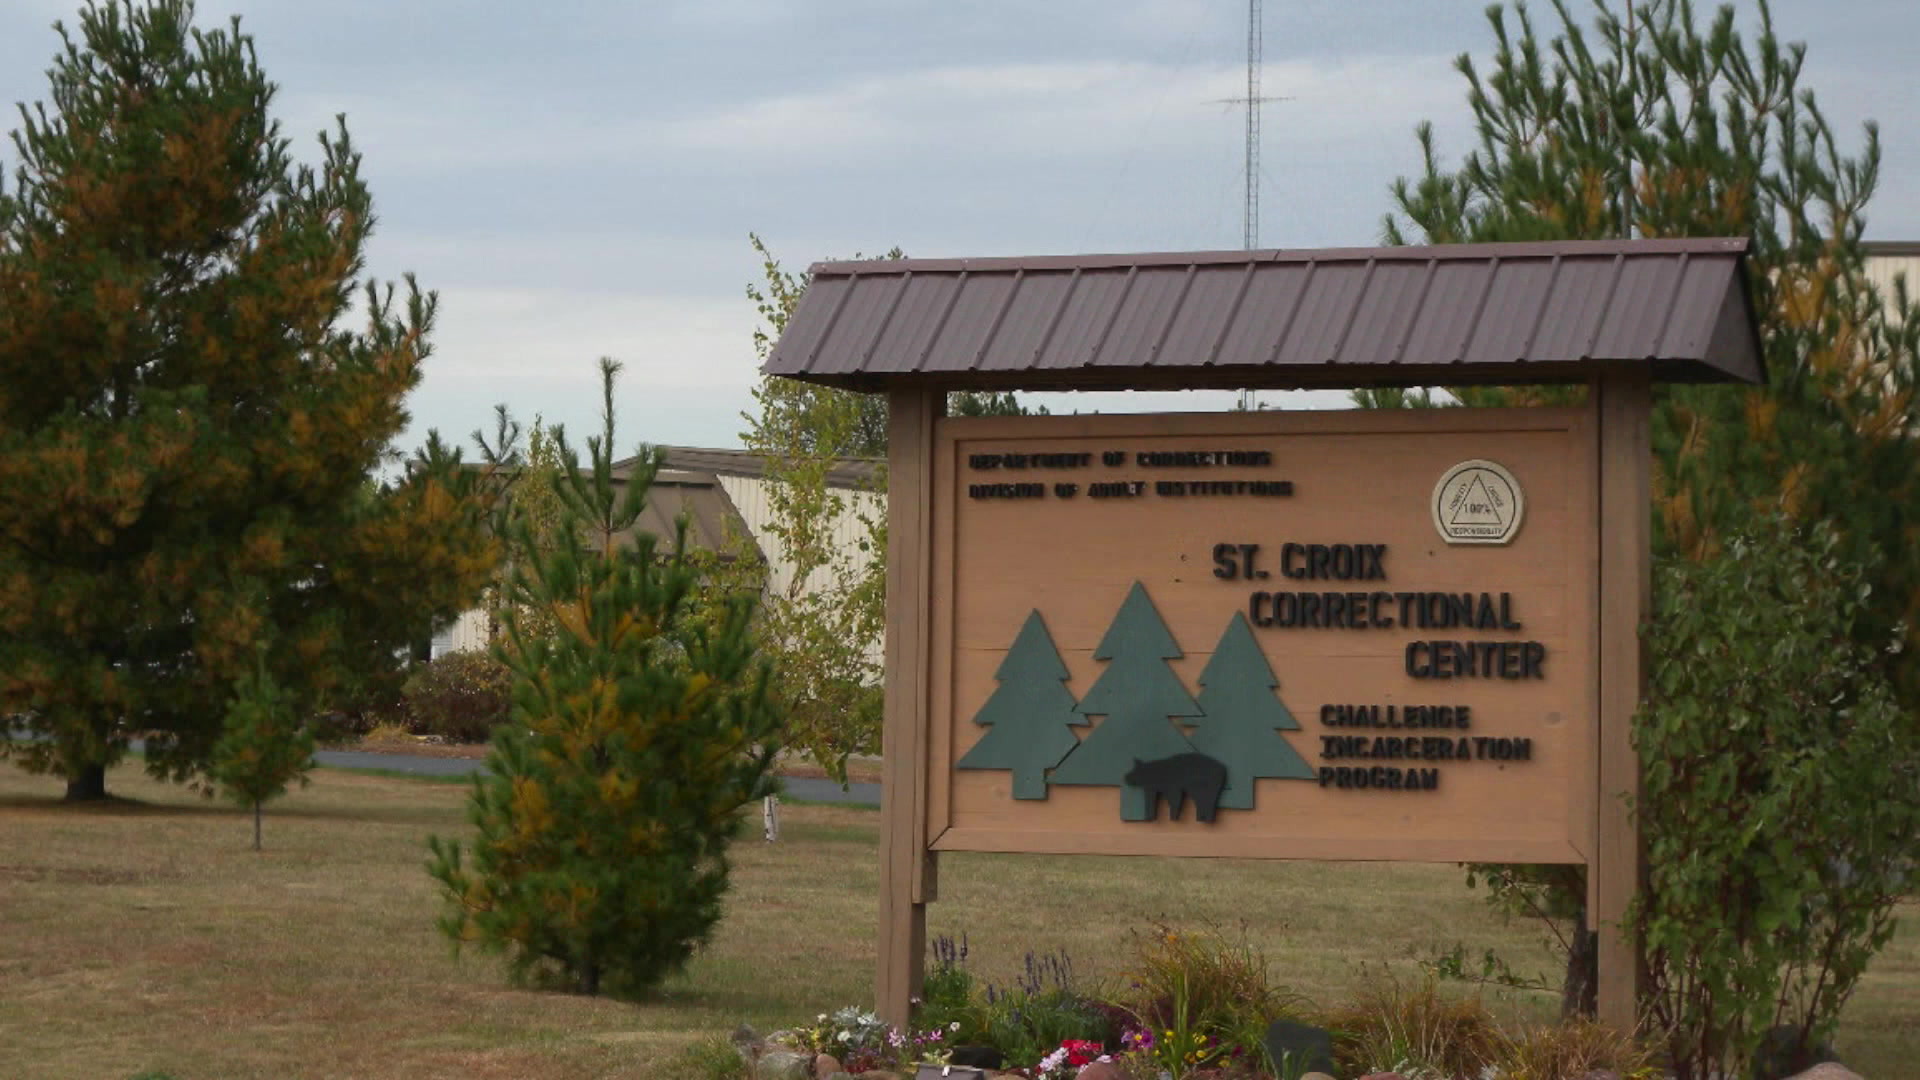 A sign for the St. Croix Correctional Center and its Challenge Incarceration Program is surrounded by pine trees.